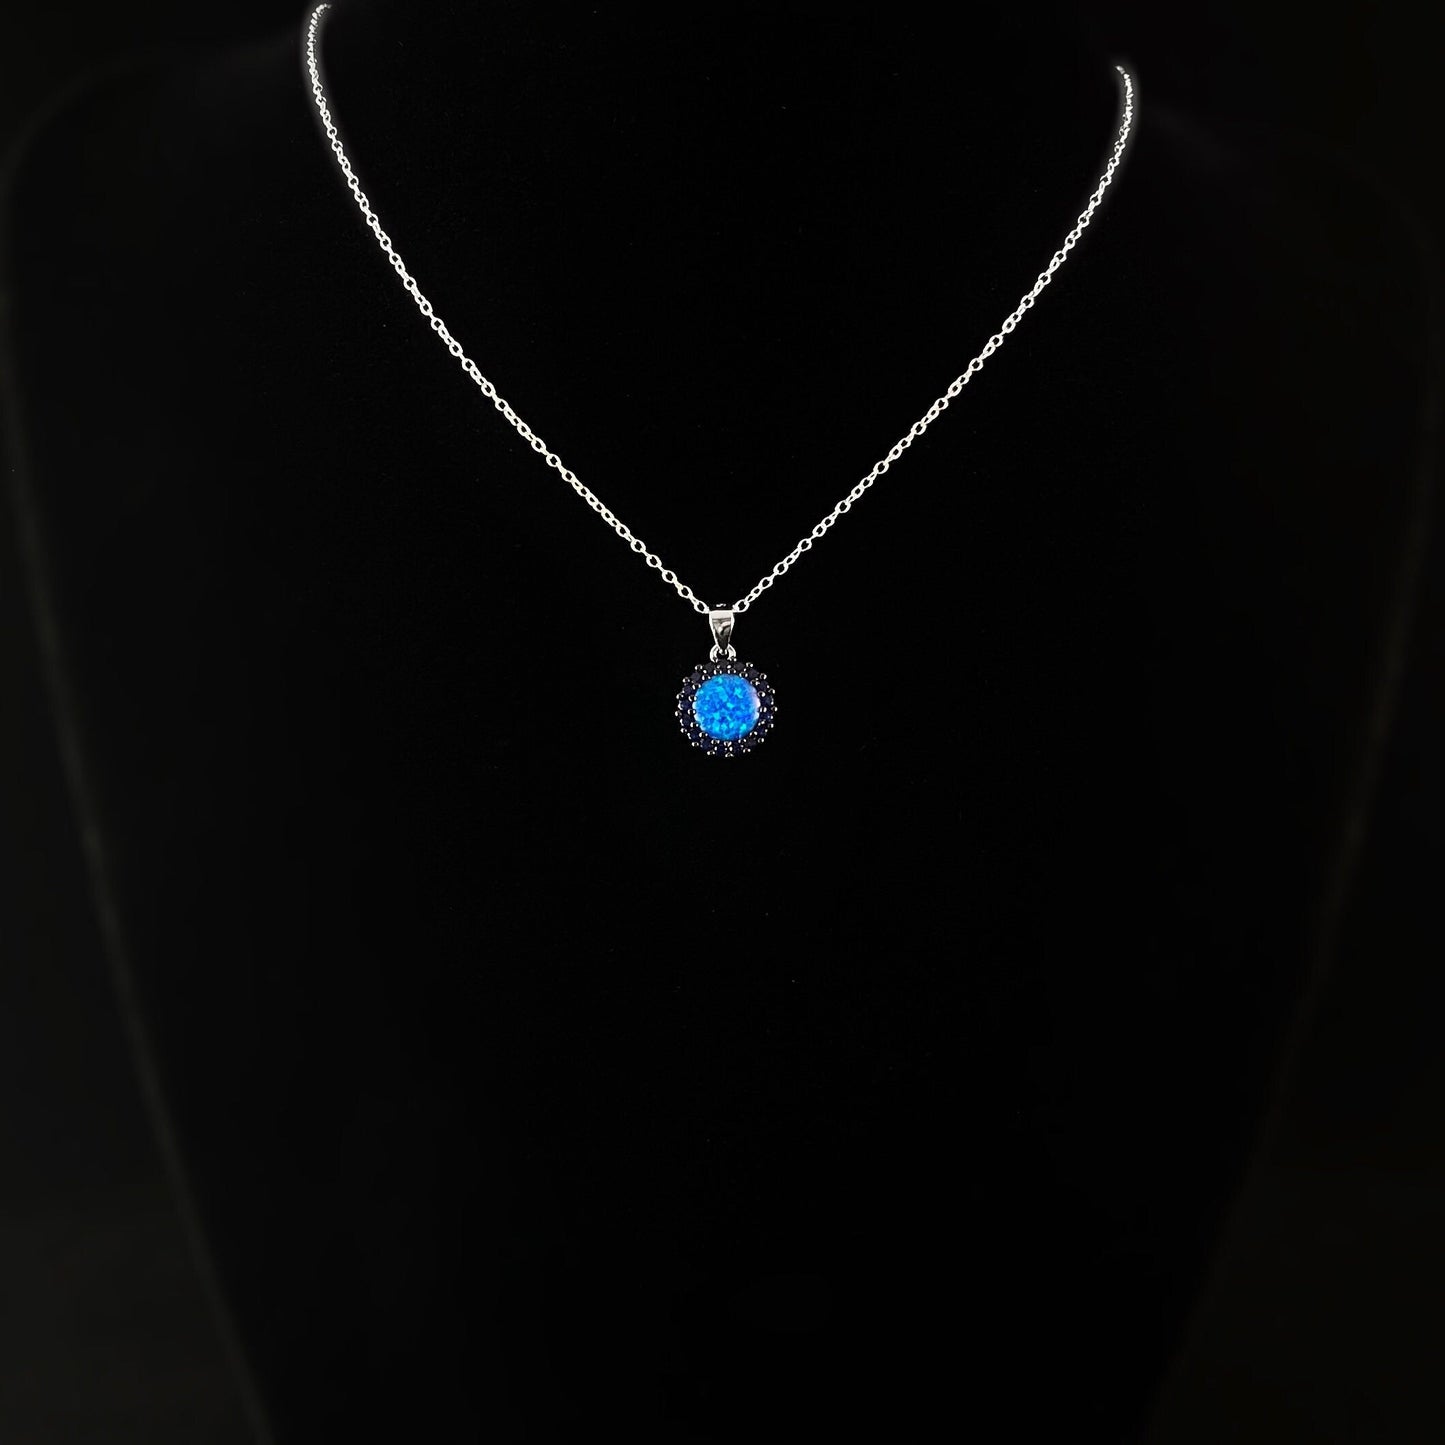 Elegant Silver Necklace with Opalescent Blue Crystal - Genevive